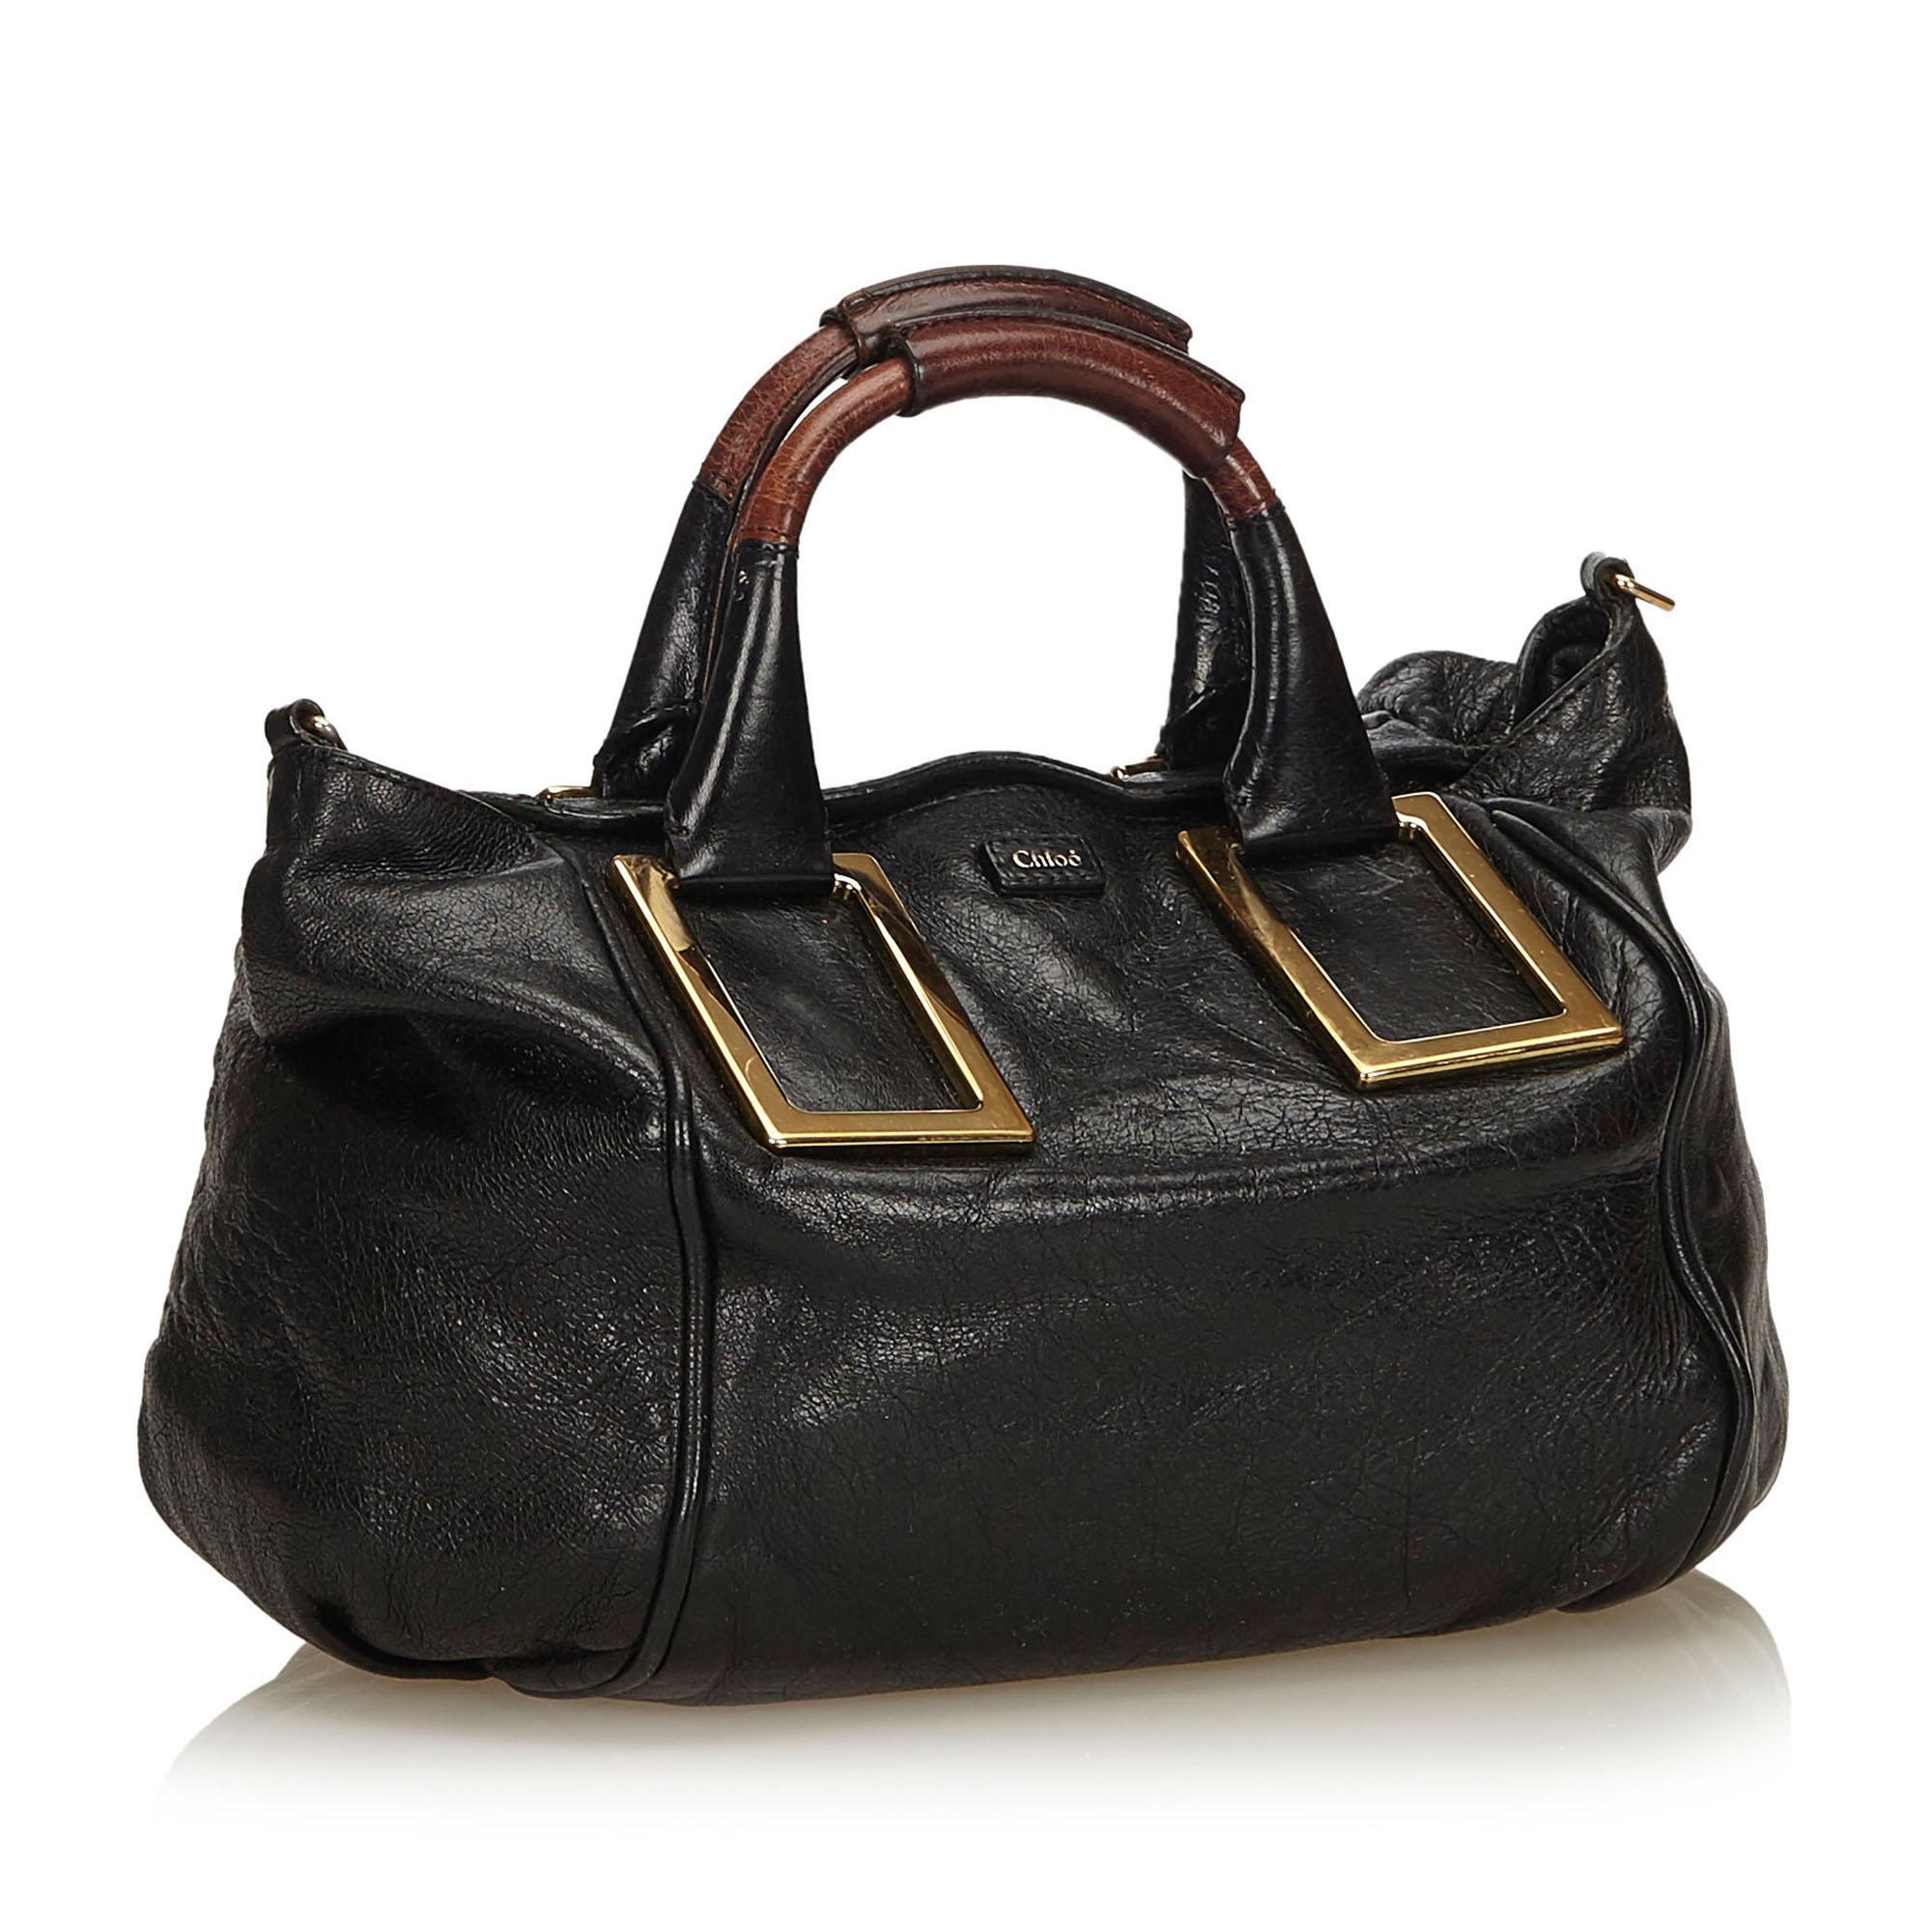 The Ethel features a leather body, rolled handles, gold-tone hardware, top zip closure, and interior zip pocket.

It carries a B condition rating.

Dimensions: 
Length 26.00 cm
Width 30.00 cm
Depth 13.00 cm
Shoulder Drop 7.00 cm

Inclusions: